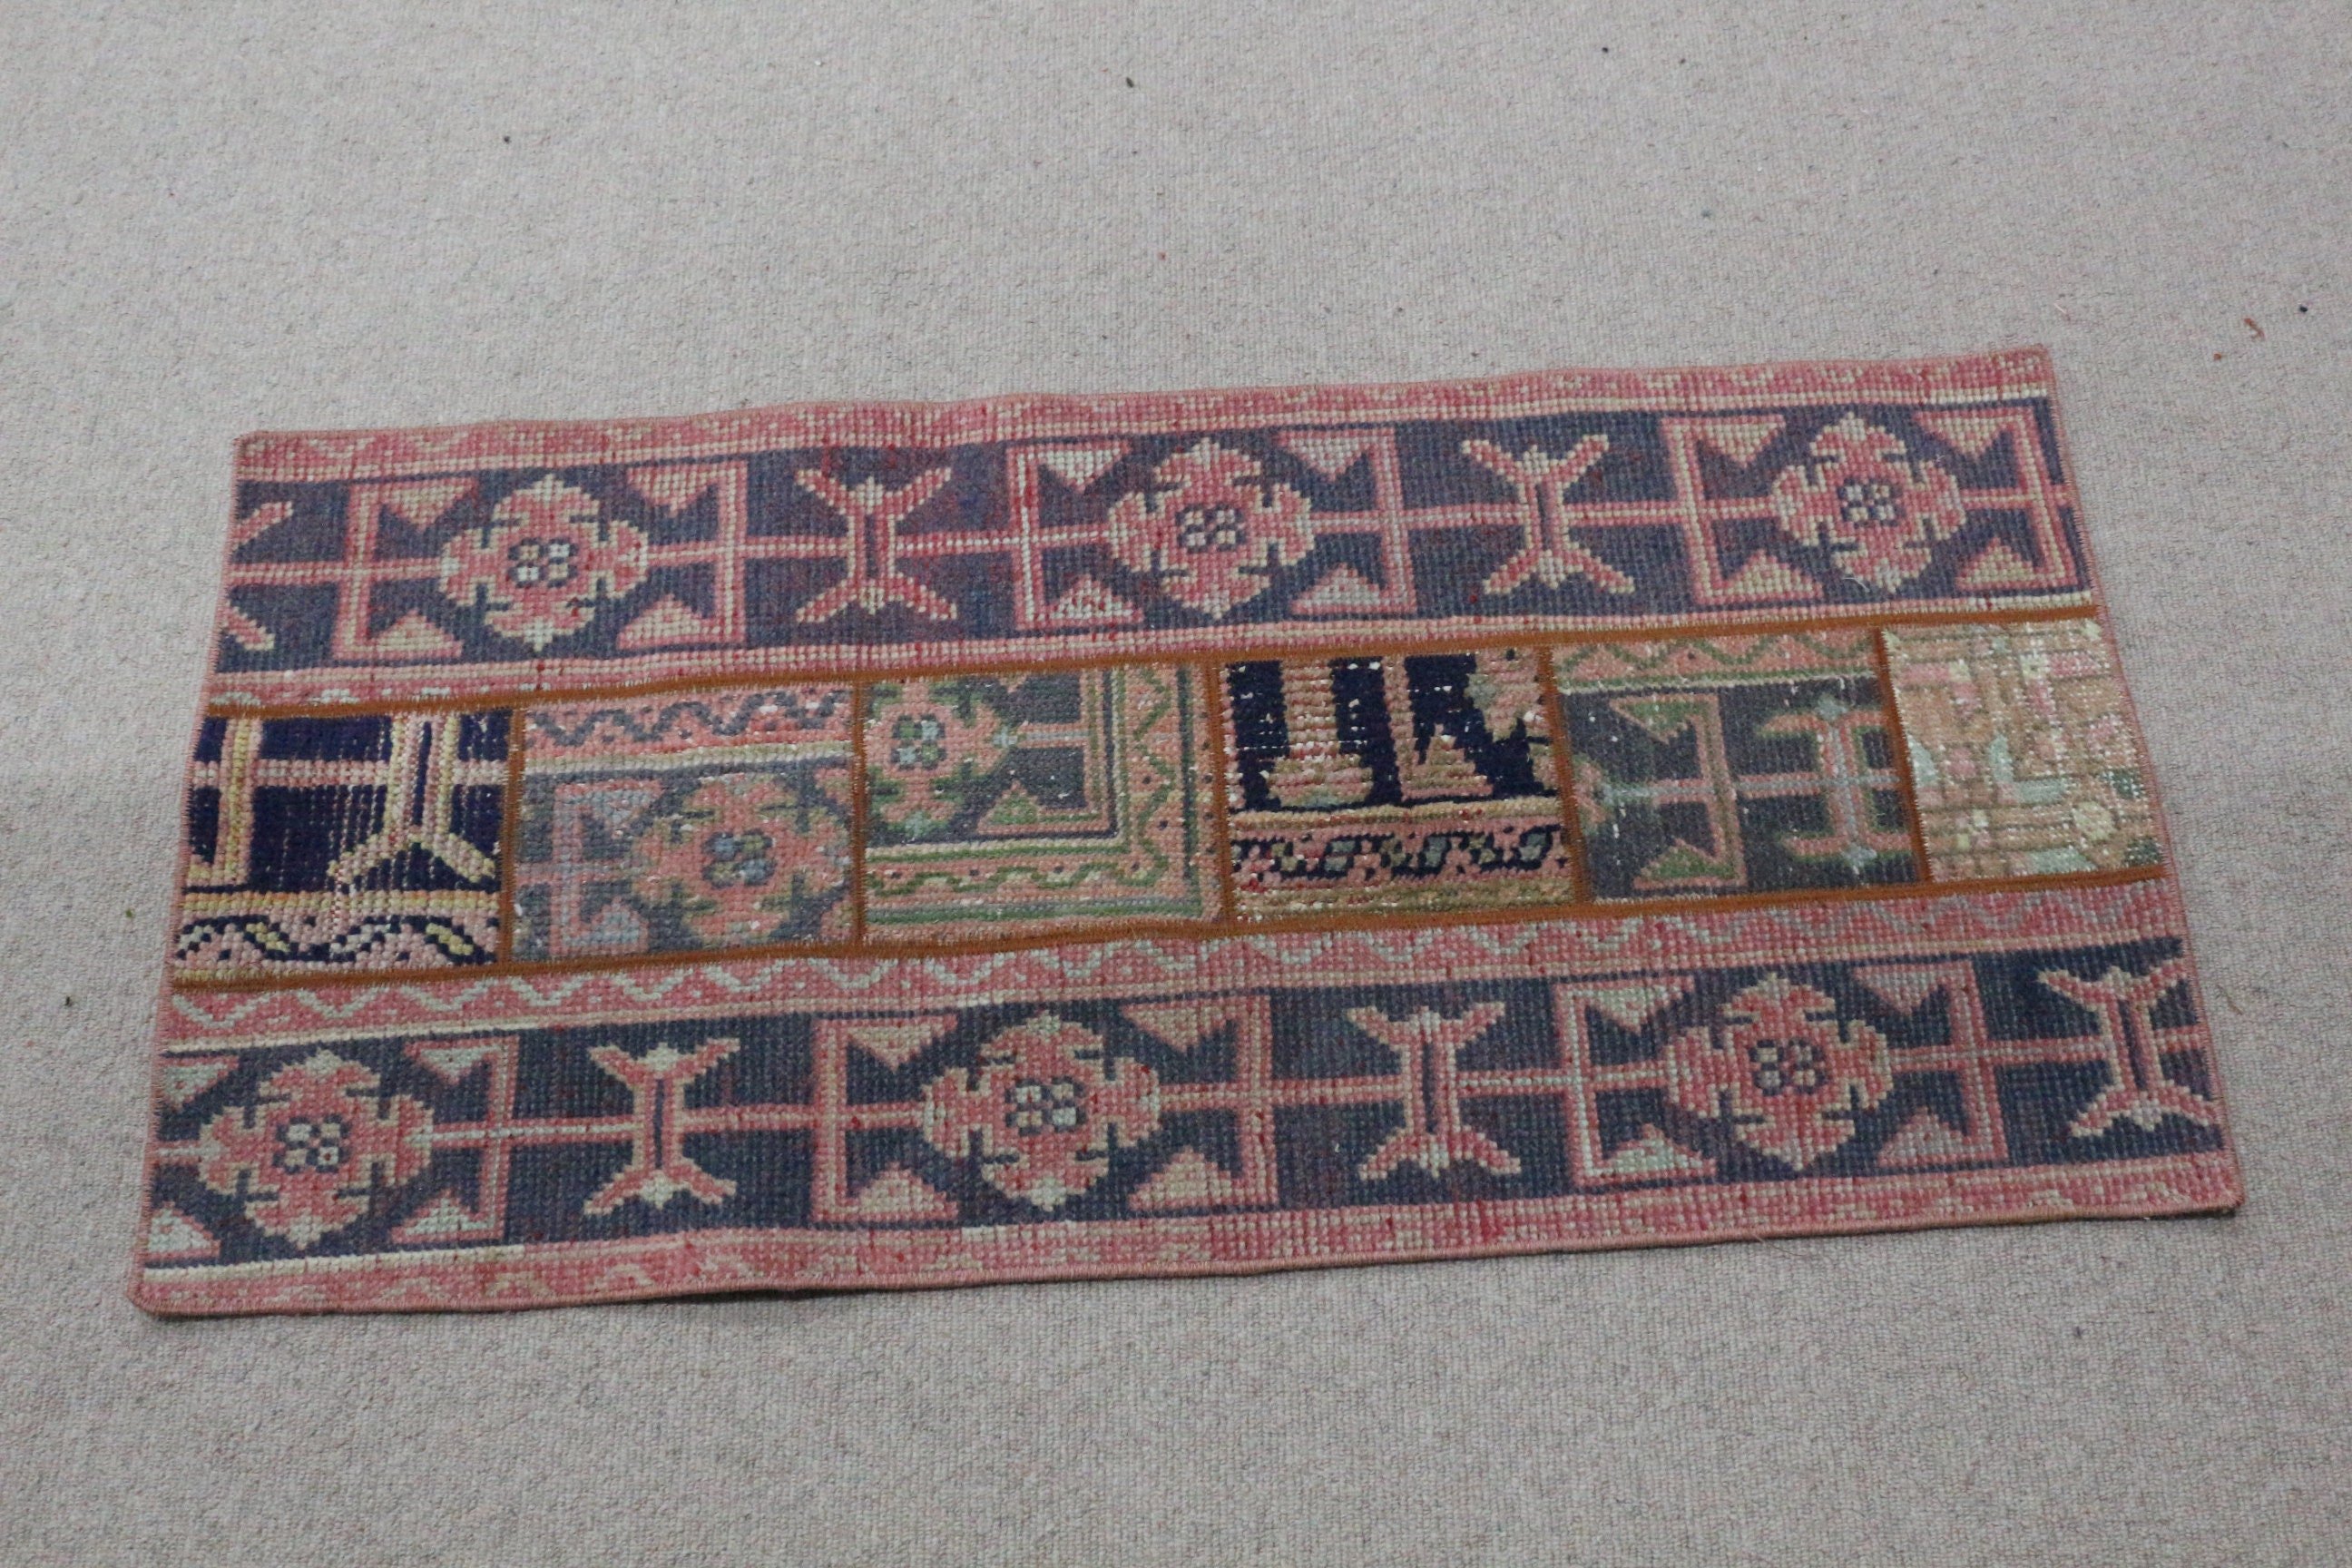 1.8x3.9 ft Small Rug, Cool Rug, Entry Rug, Vintage Rugs, Kitchen Rug, Wall Hanging Rug, Red Anatolian Rug, Rugs for Entry, Turkish Rugs